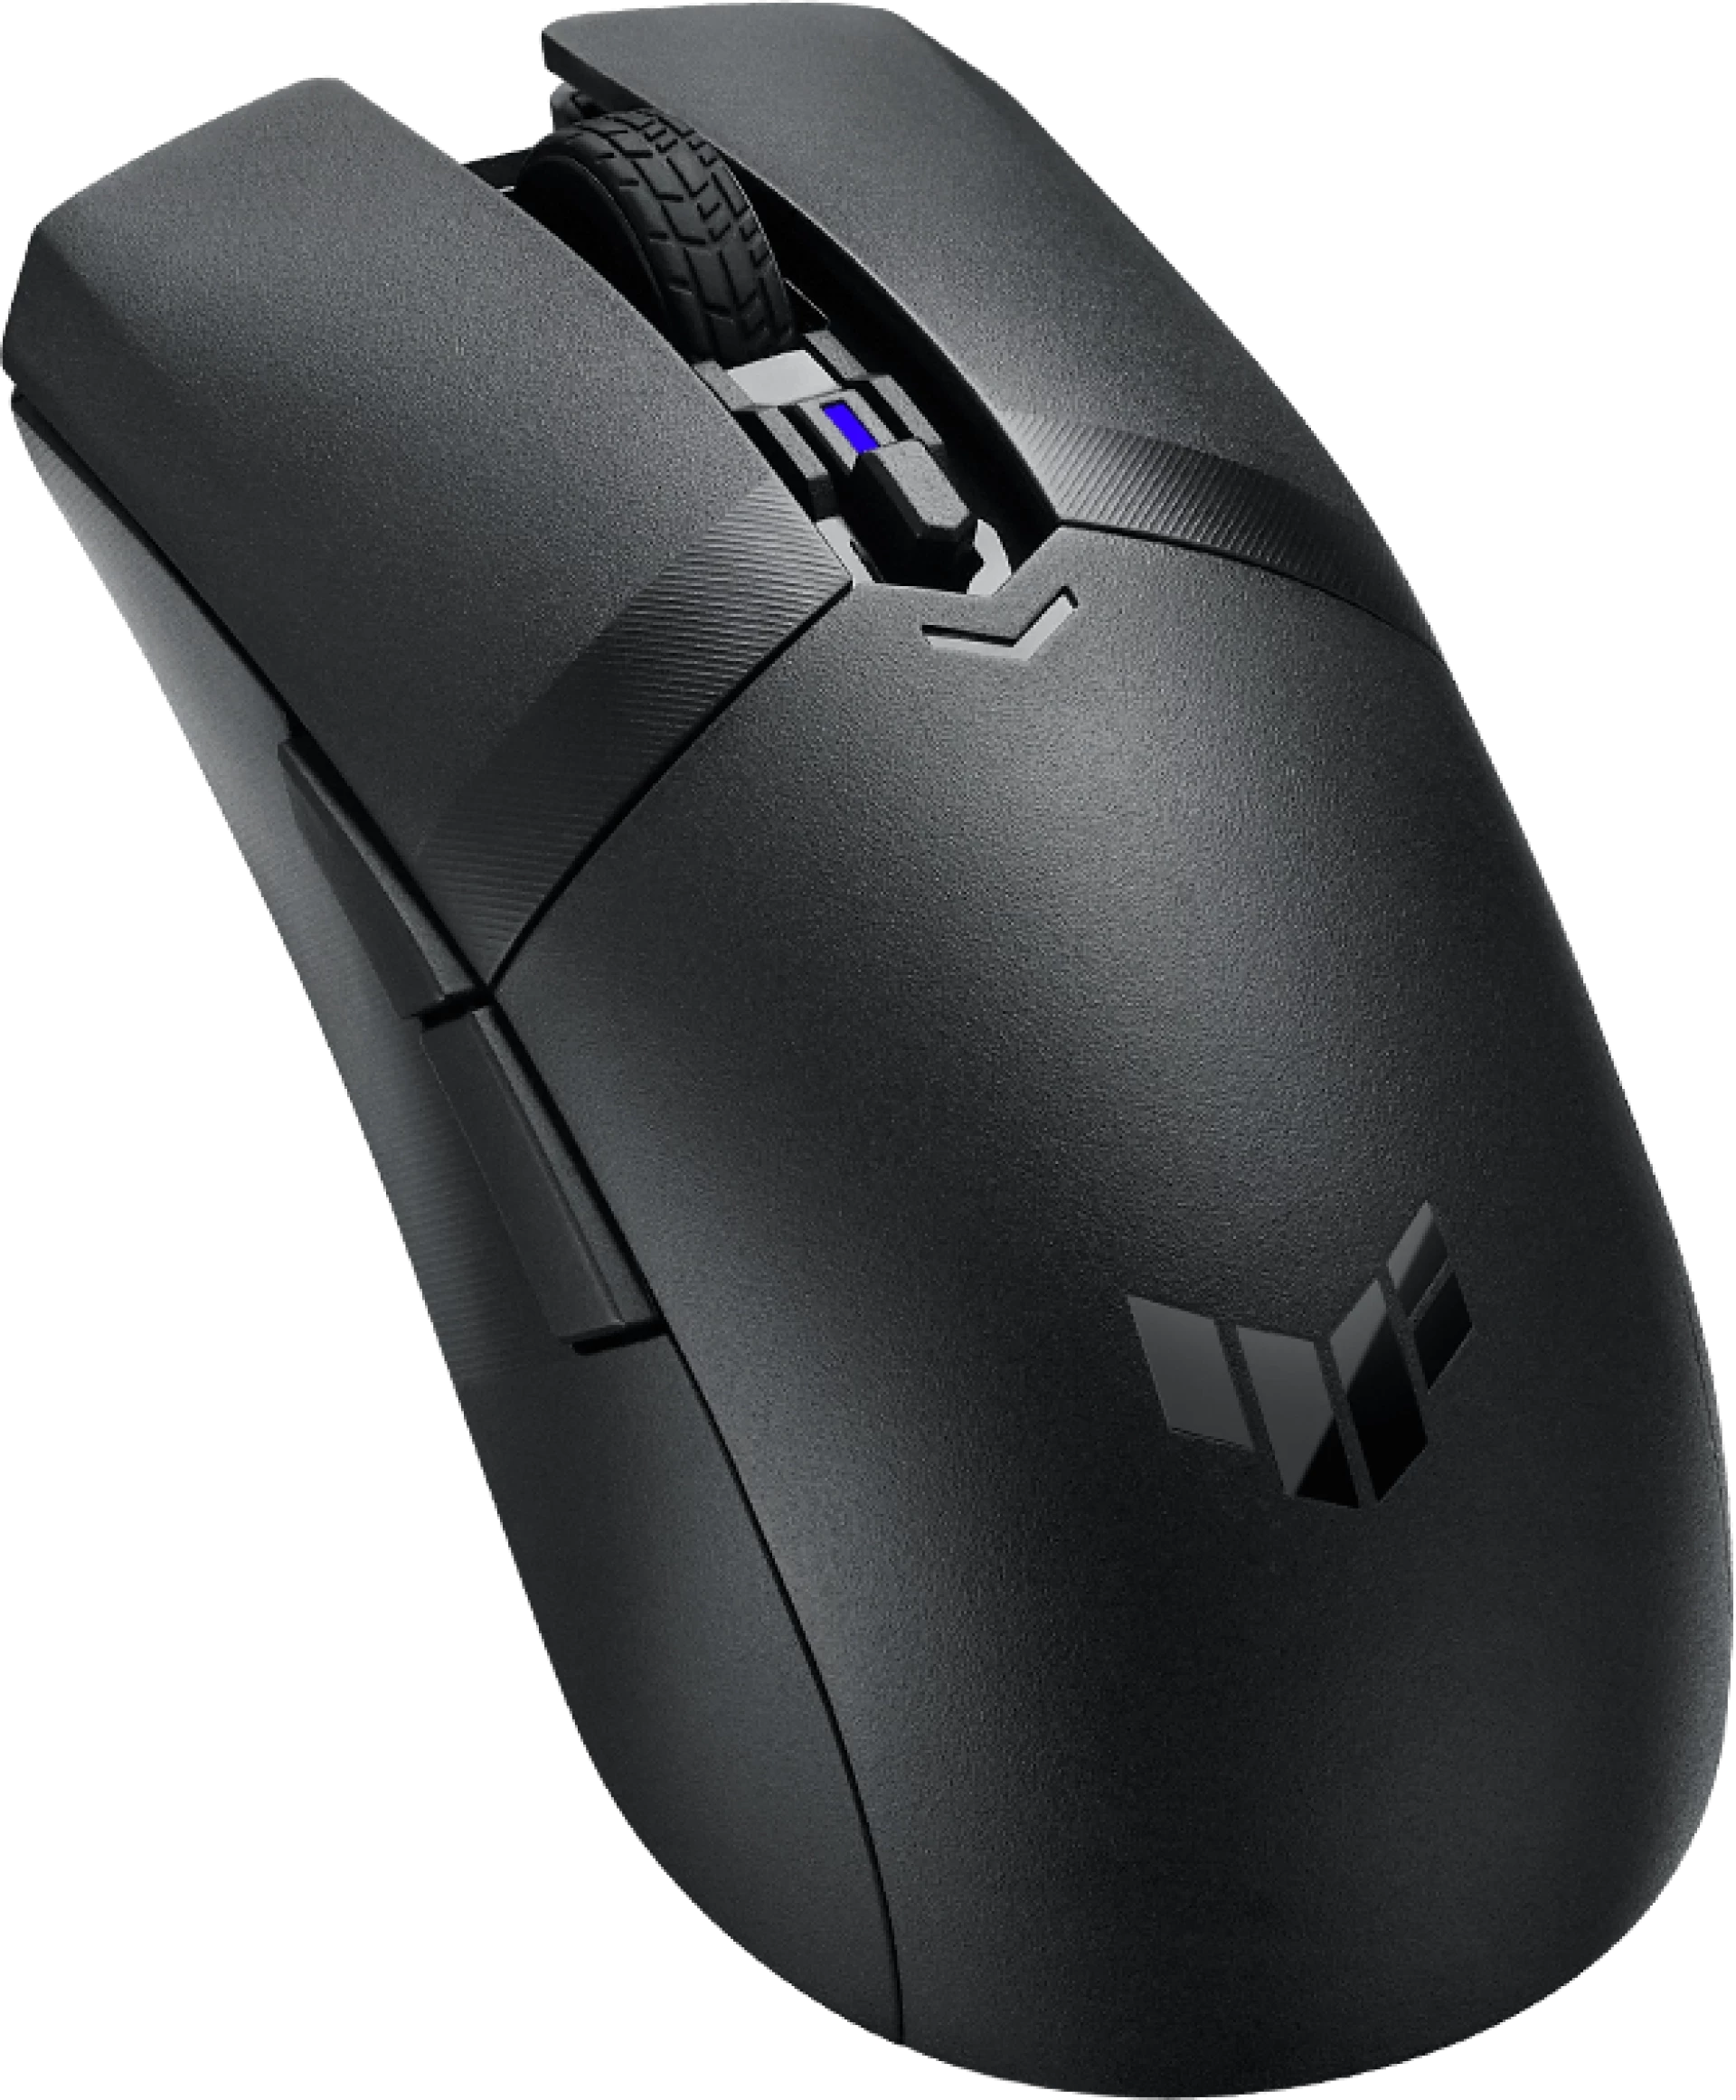 MOUSE ASUS TUF M4 Gaming Wireless